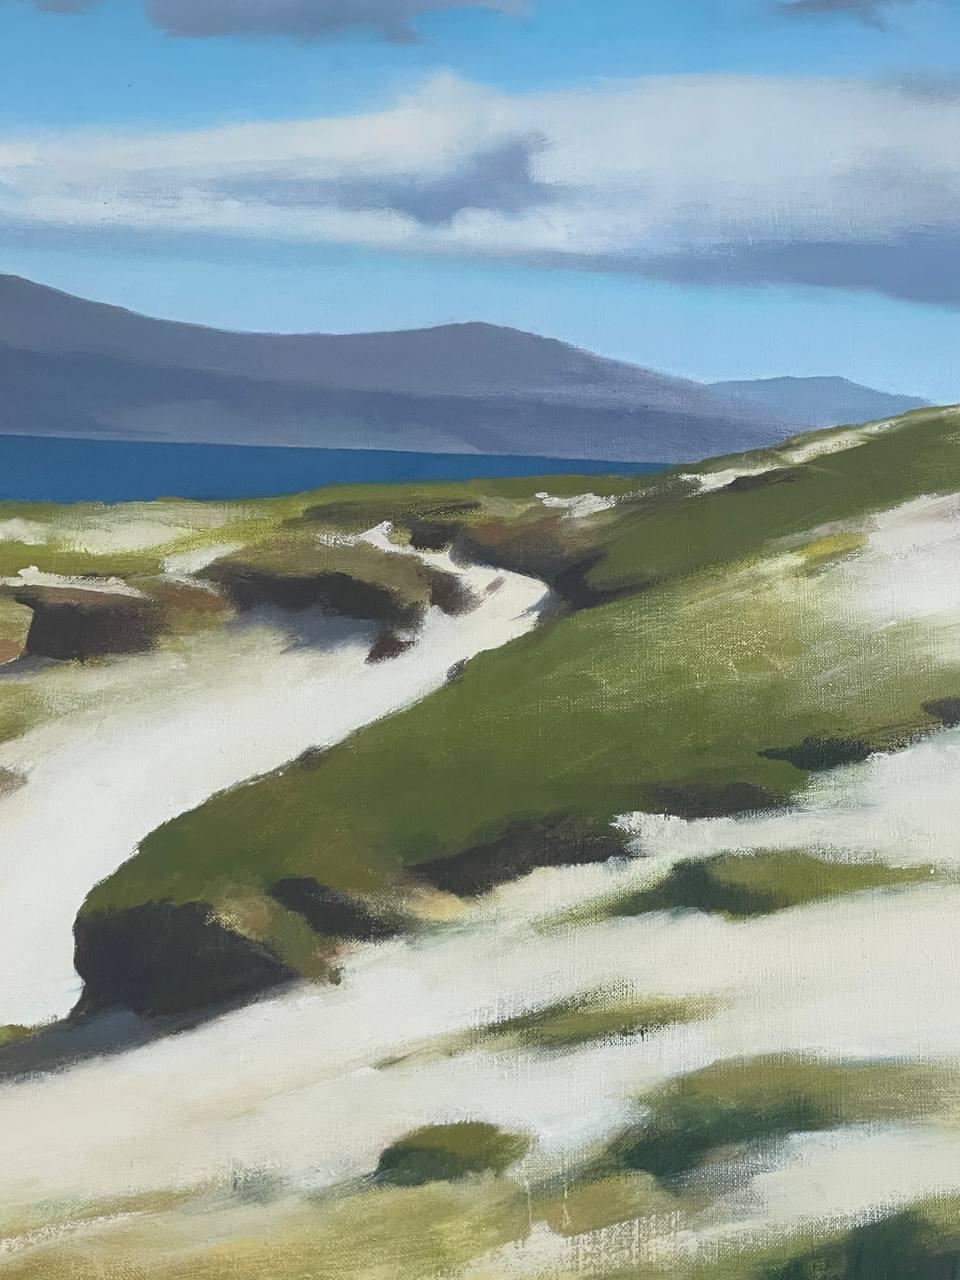 ALISTAIR W THOMSON (b.1929)
Alistair Thomson is a Scottish post-war & contemporary painter of landscapes and still life, typically in a crisp and luminous style.